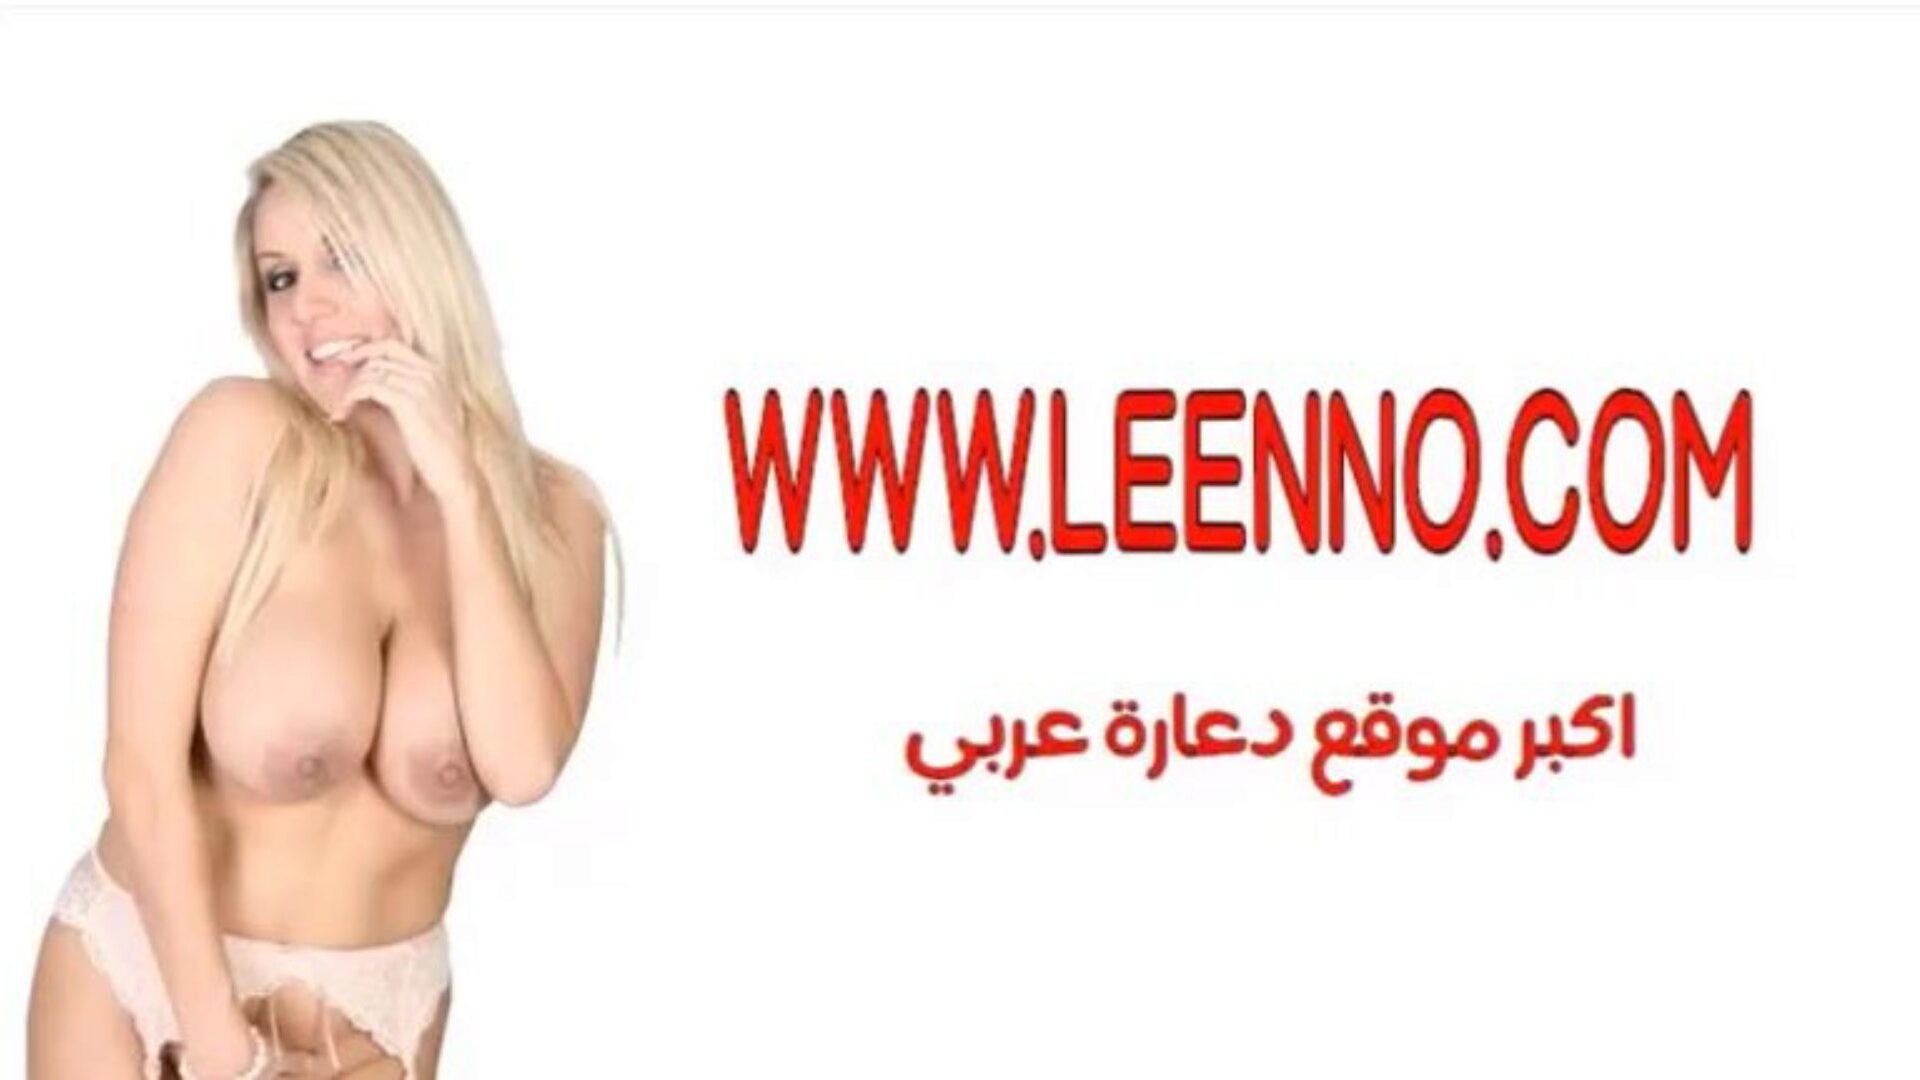 Egyptian Said Oe Garto Part 3 Free Red Tub Xxx Porn Video | xHamster Watch Egyptian Said Oe Garto Part 3 video on xHamster, the thickest fuckfest tube website with tons of free Arab Red Tub Xxx & Beeg Beeg porno movies